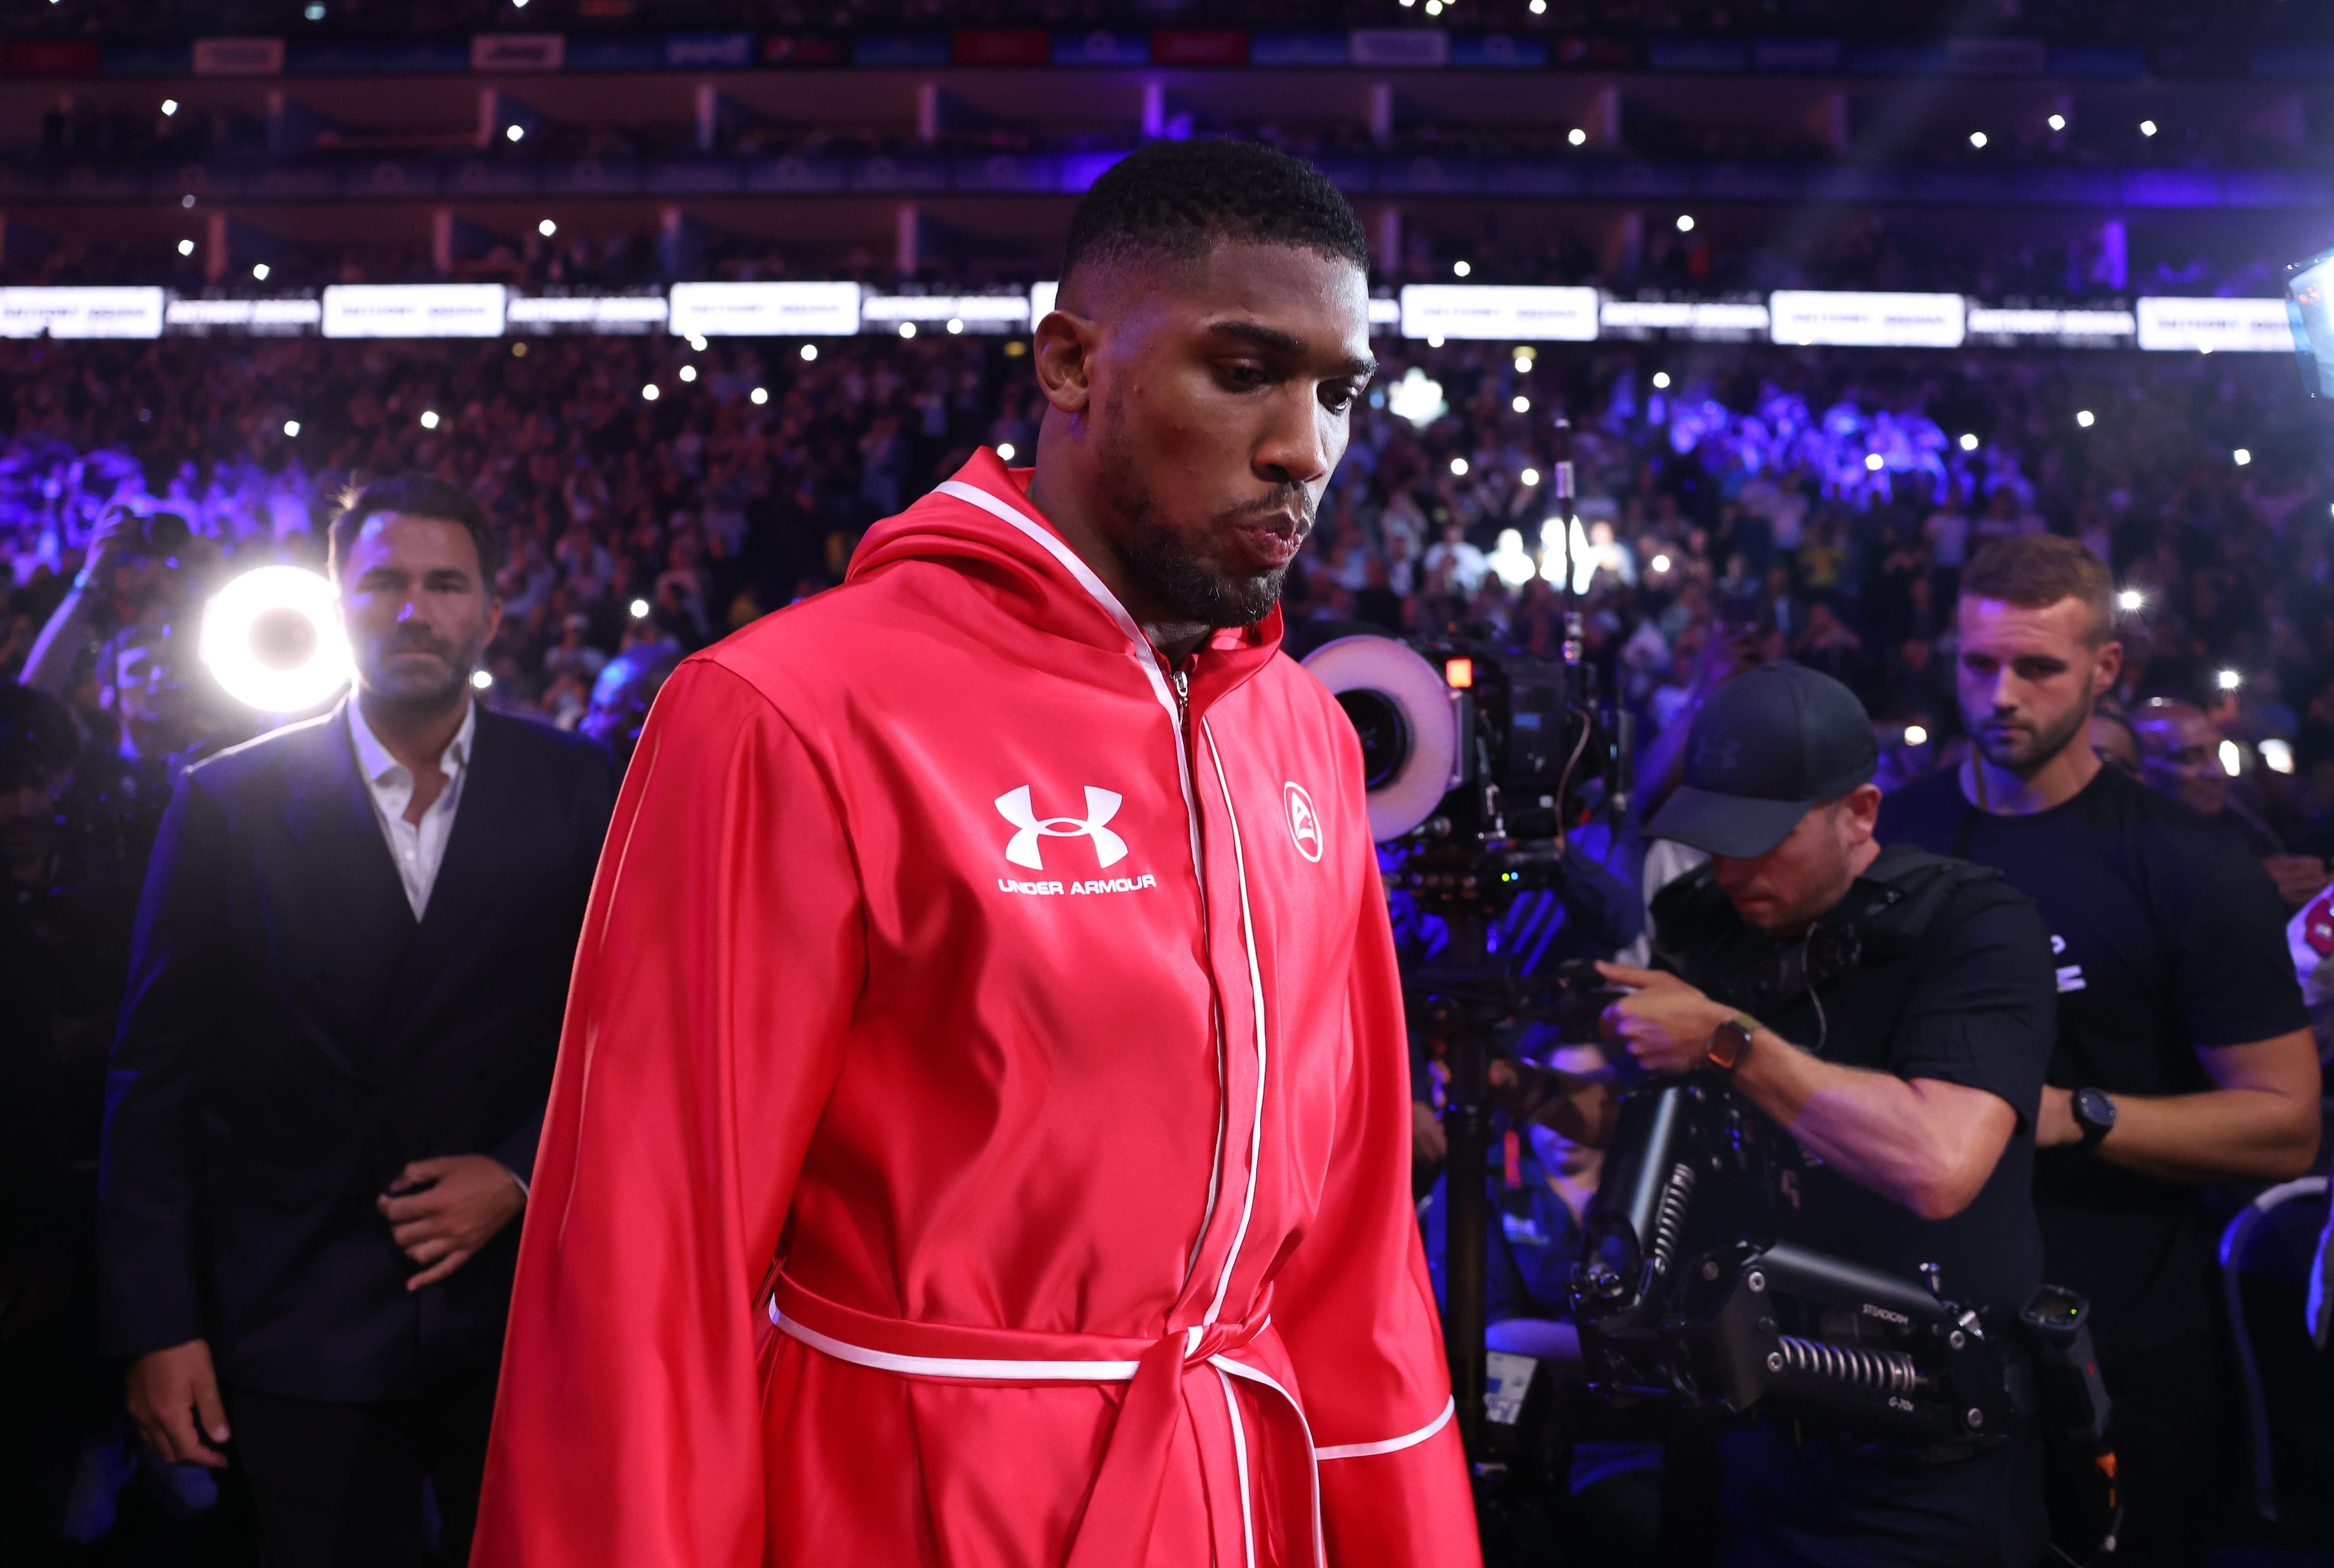 Joshua admits career would be ‘incomplete’ without Fury or Wilder on his record